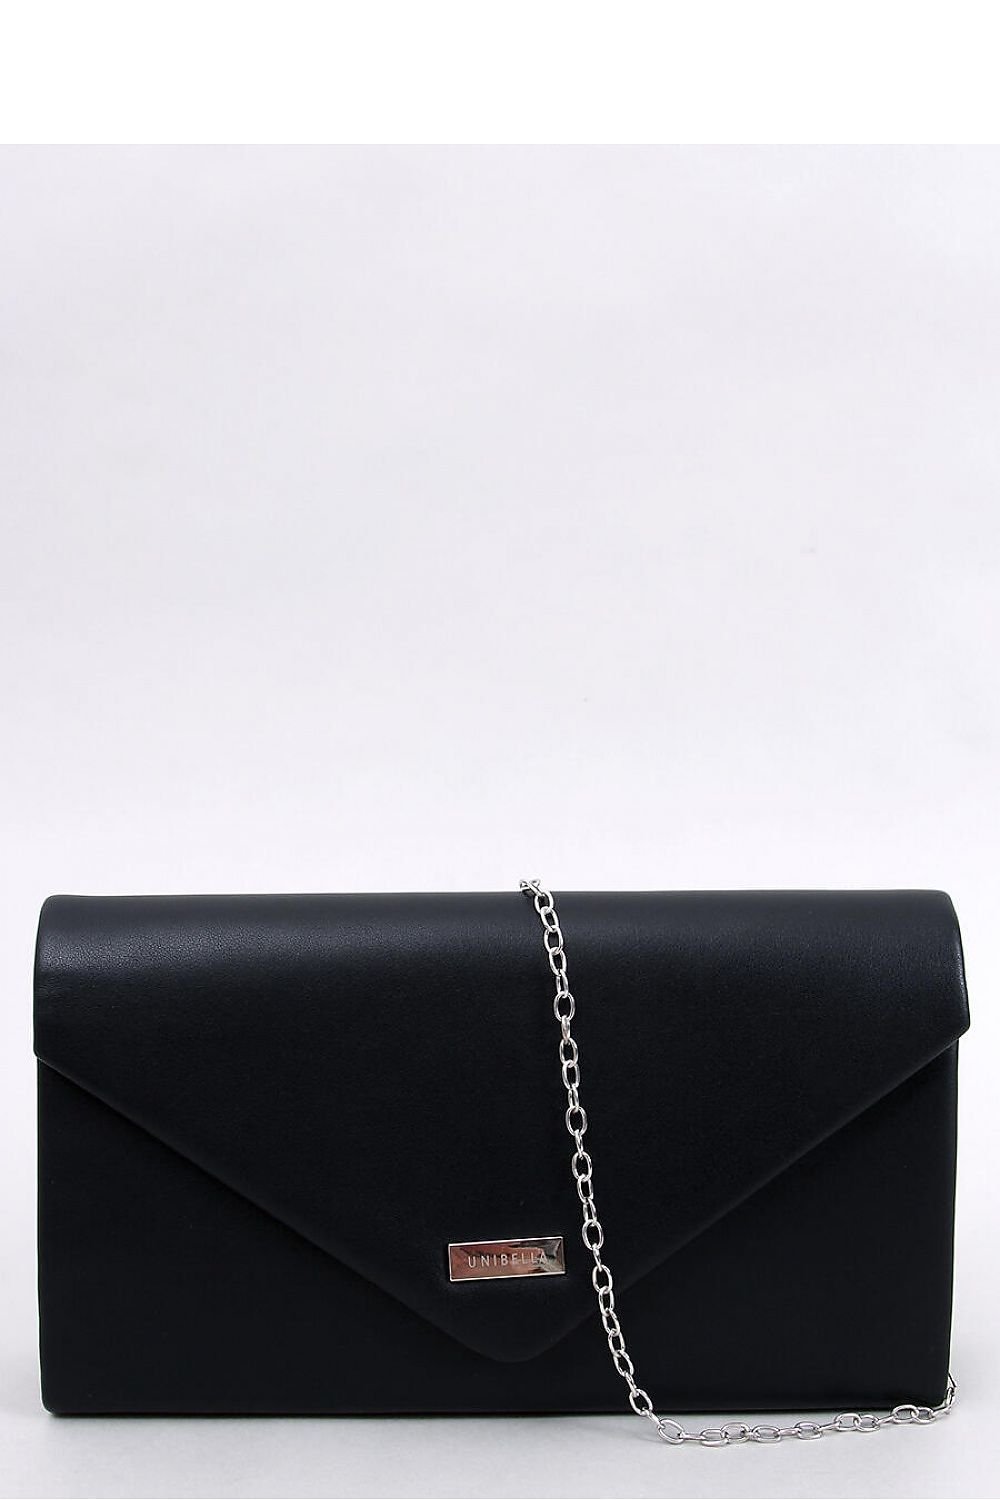 Envelope clutch bag - M&H FashionEnvelope clutch bagM&H FashionM&H Fashion192448_1116840one-size-fits-allEnvelope clutch bag InelloM&H FashionM&H FashionElegant handbag for women ? clutch bag. It can be carried in two ways ? in hand or on a silver chain attached to it. The unique beauty of the handbag lies in the claEnvelope clutch bag